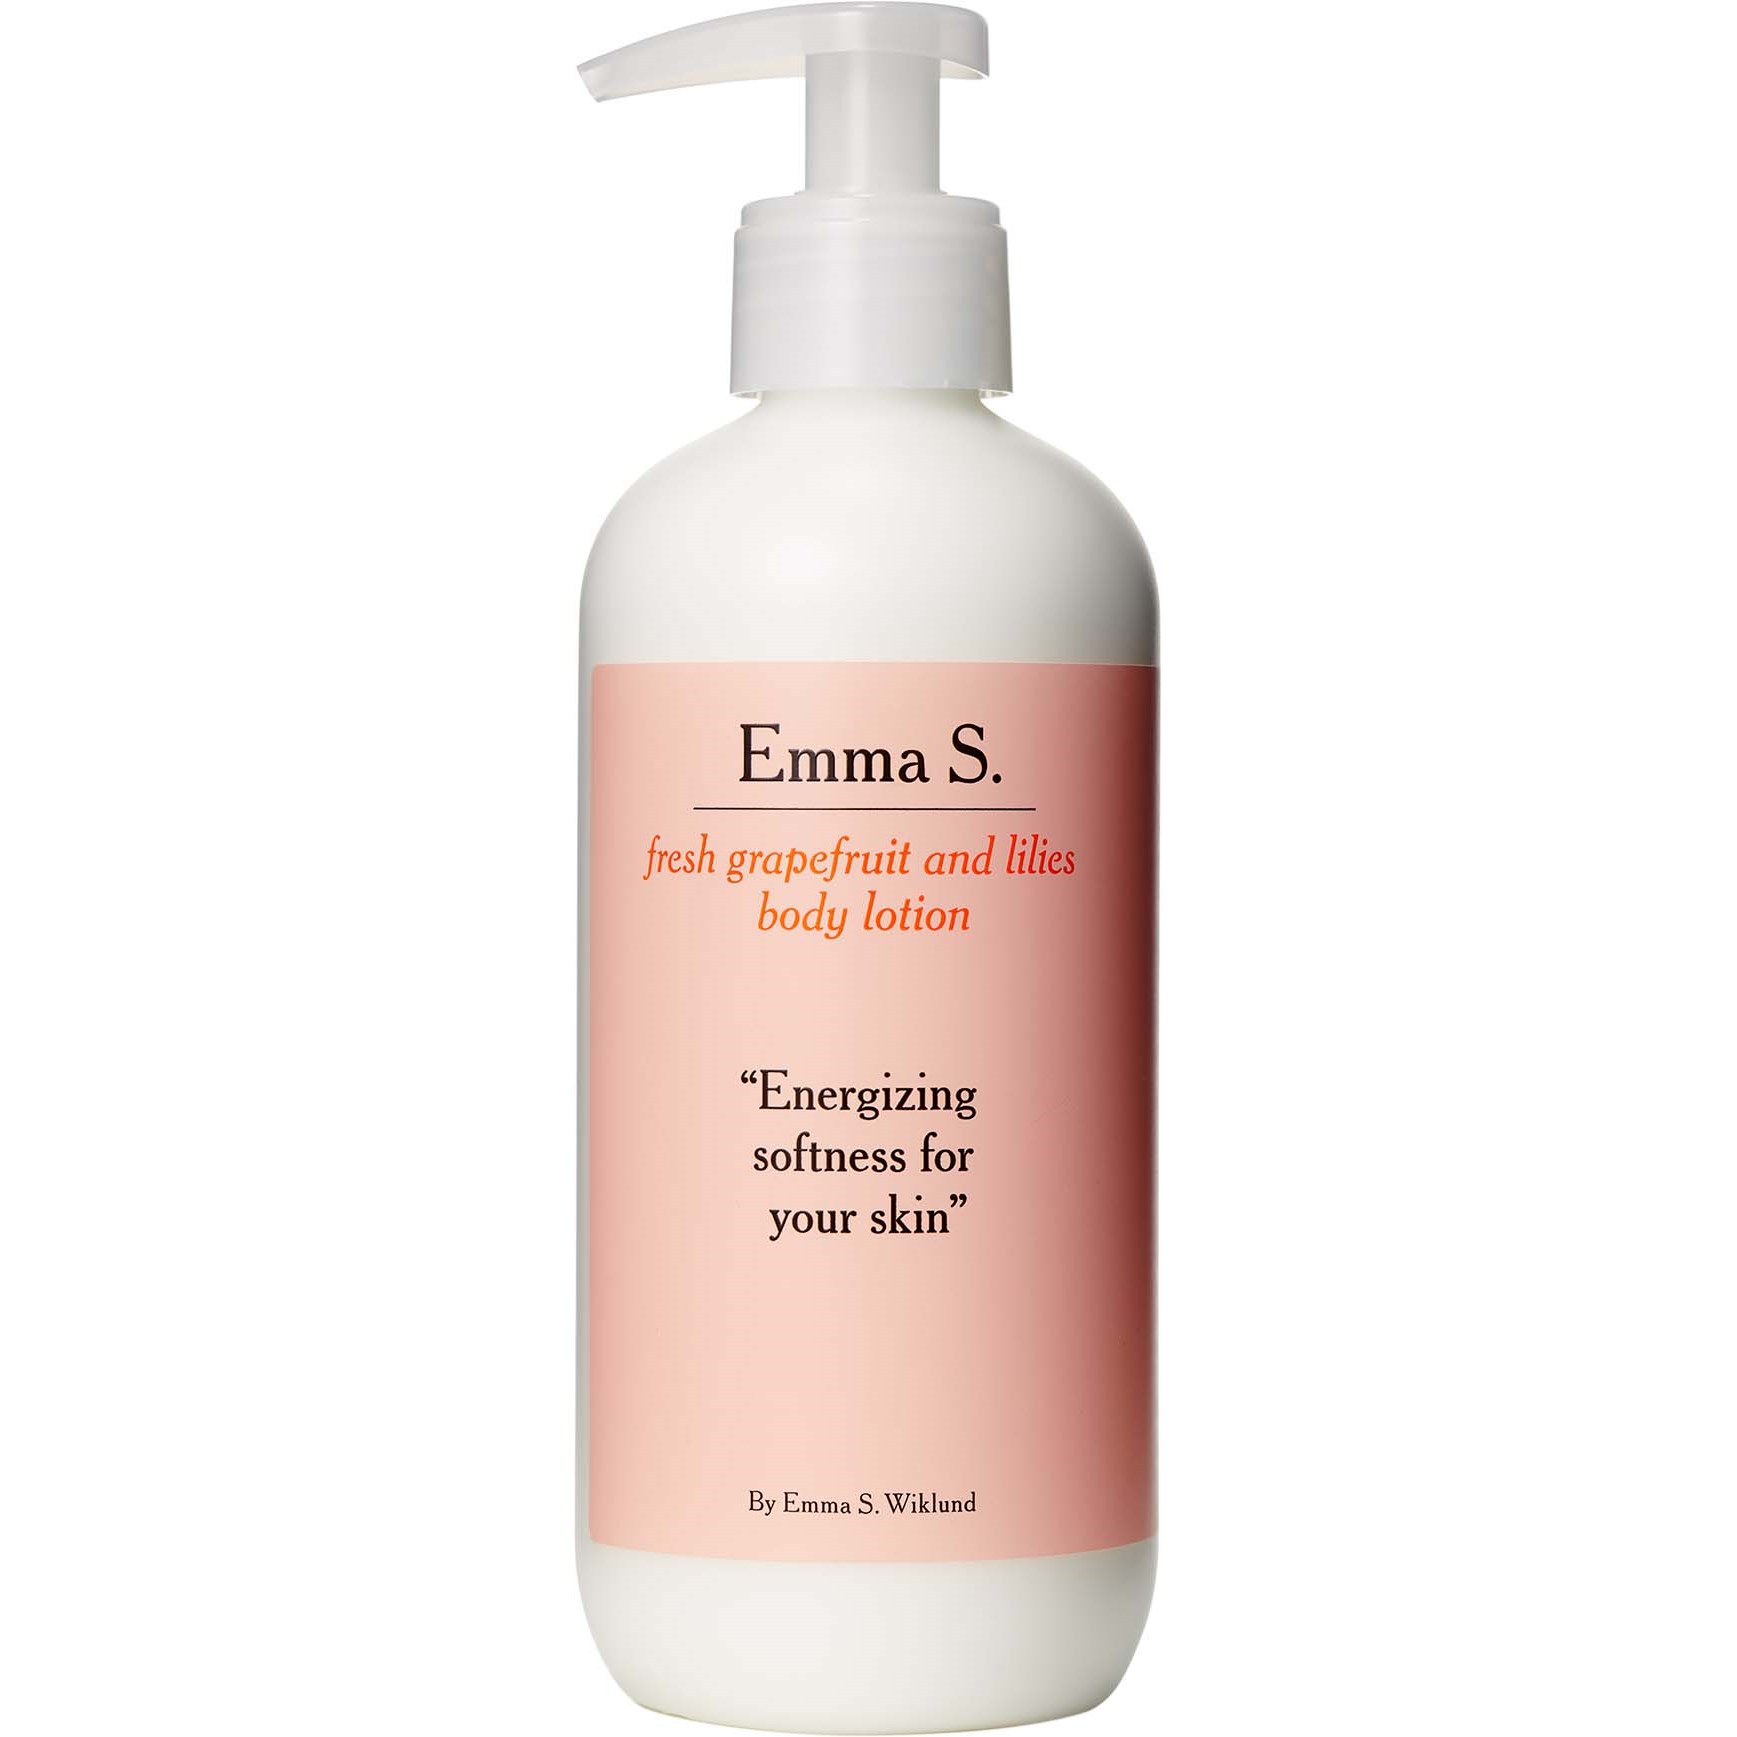 Emma S. Fresh Grapefruit And Lilies Body Lotion